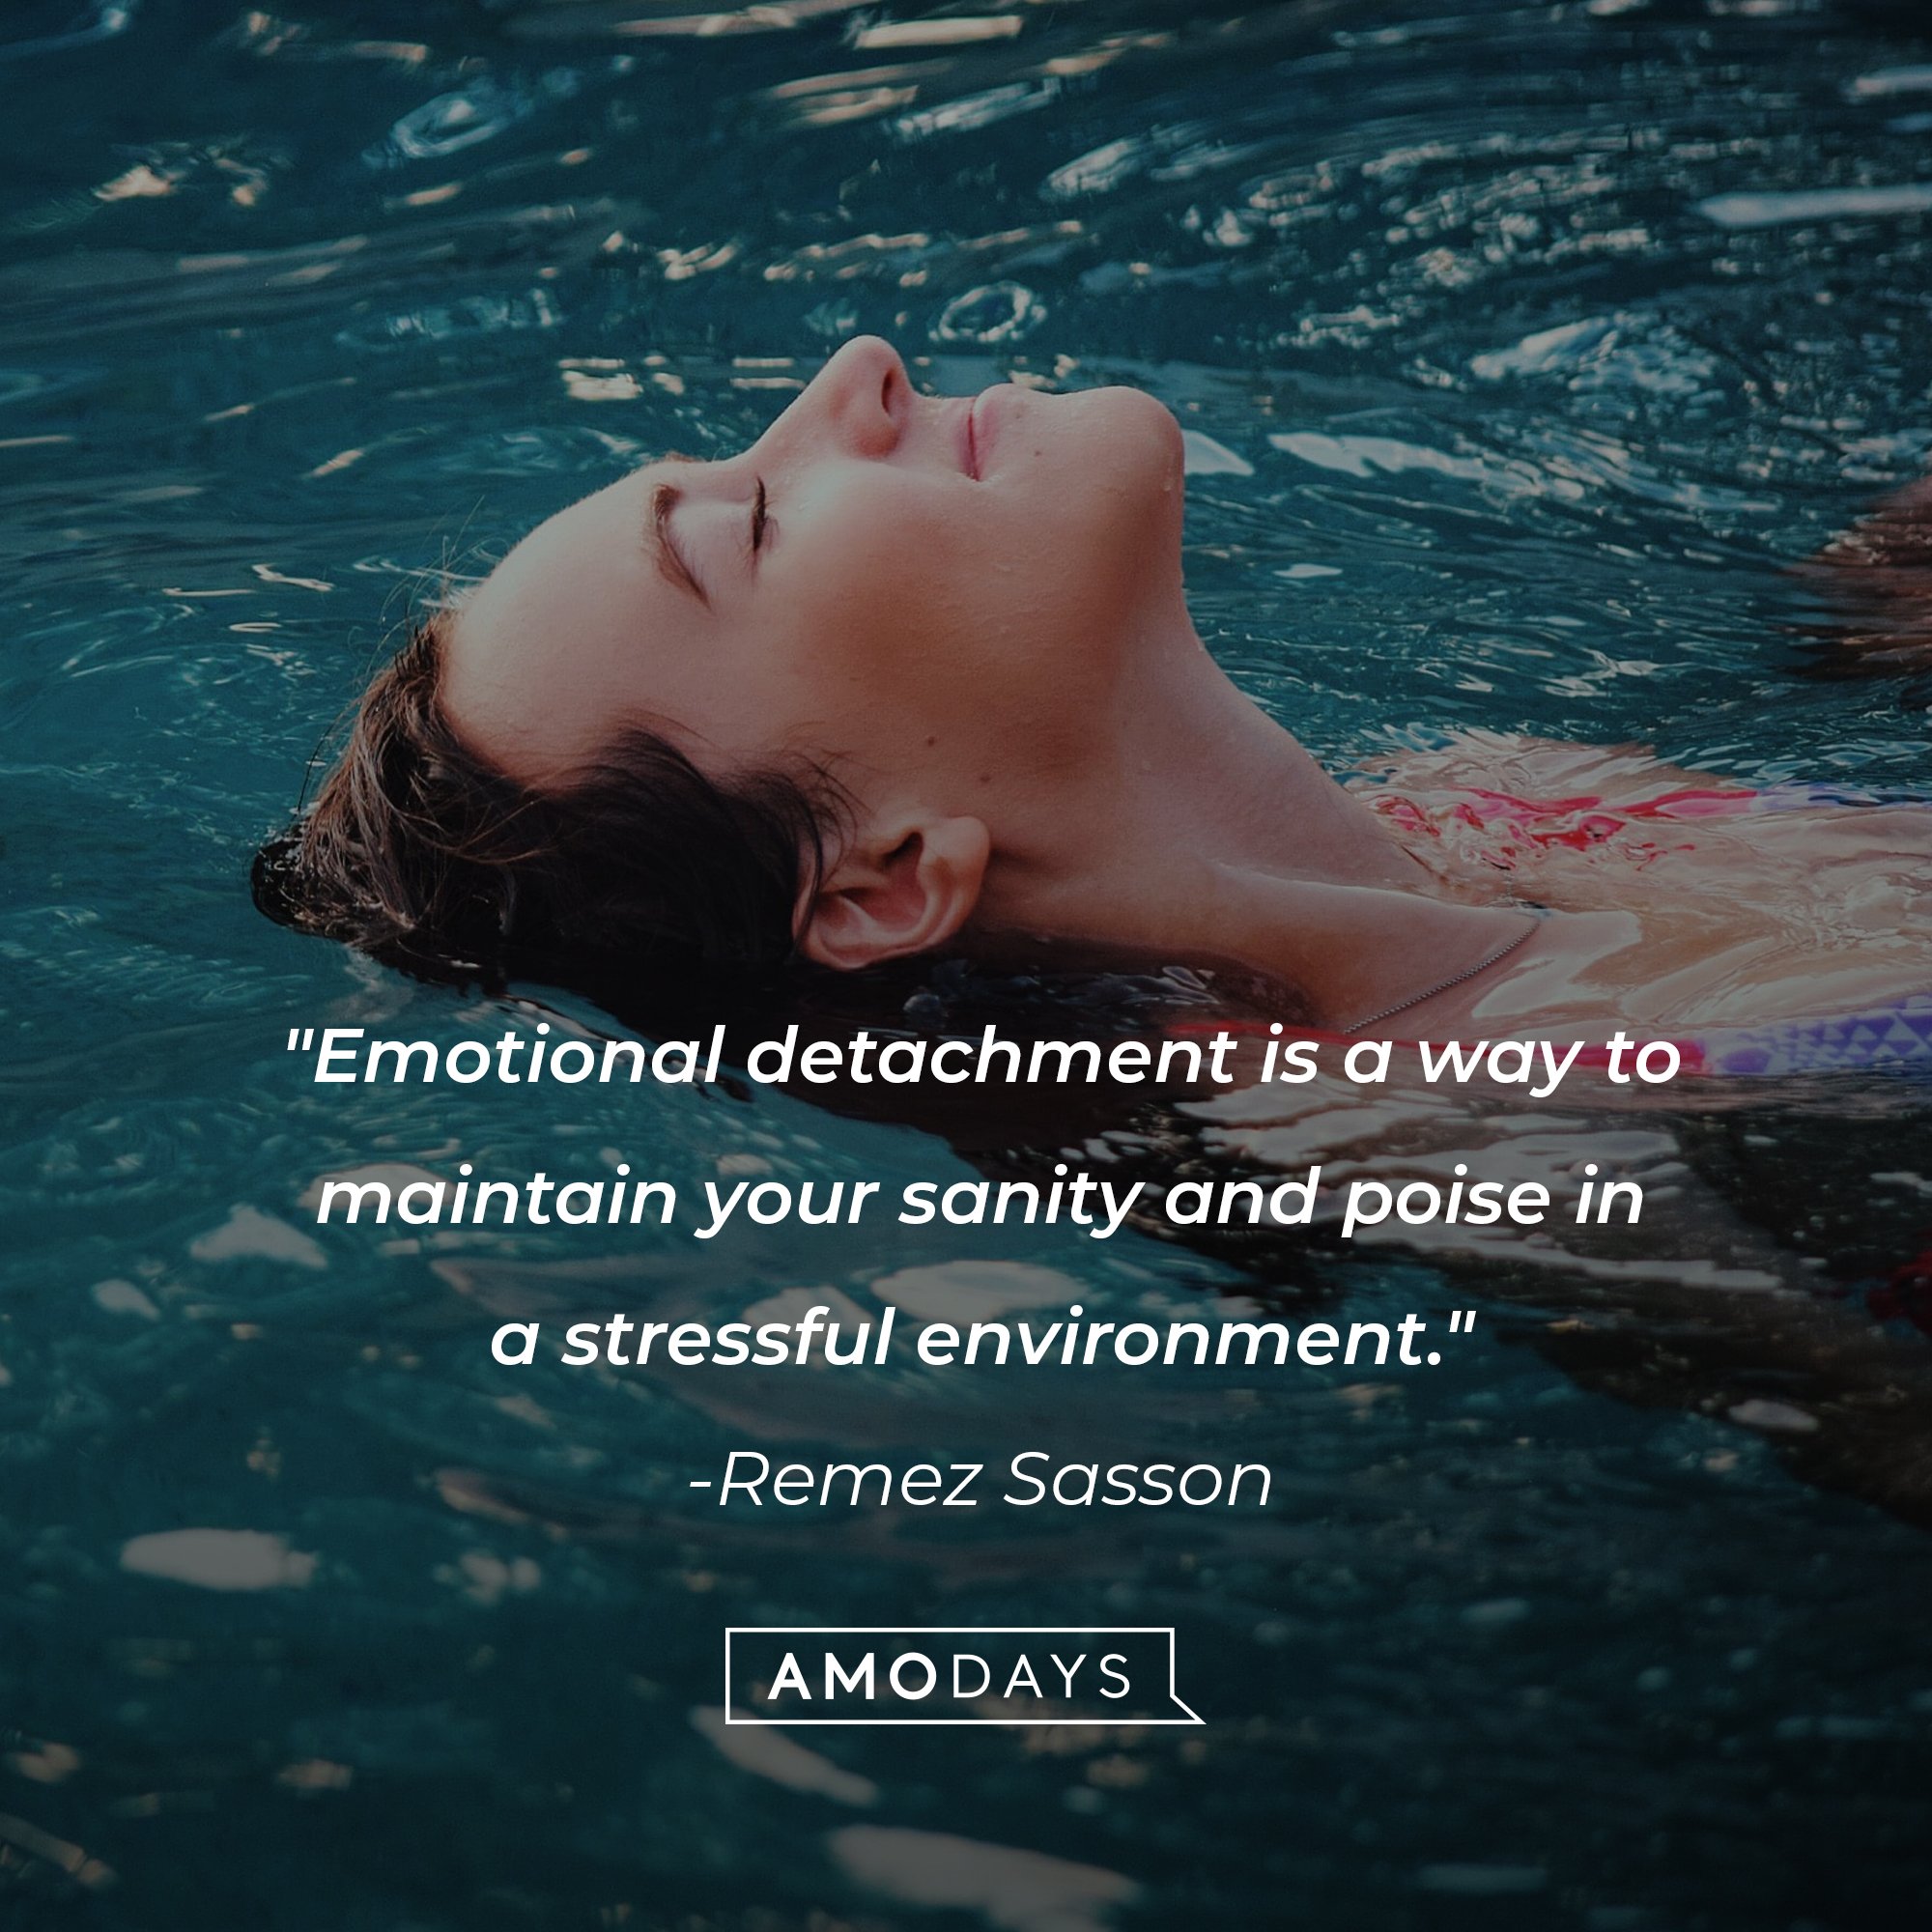 Remez Sasson's quote: "Emotional detachment is a way to maintain your sanity and poise in a stressful environment." | Image: AmoDays